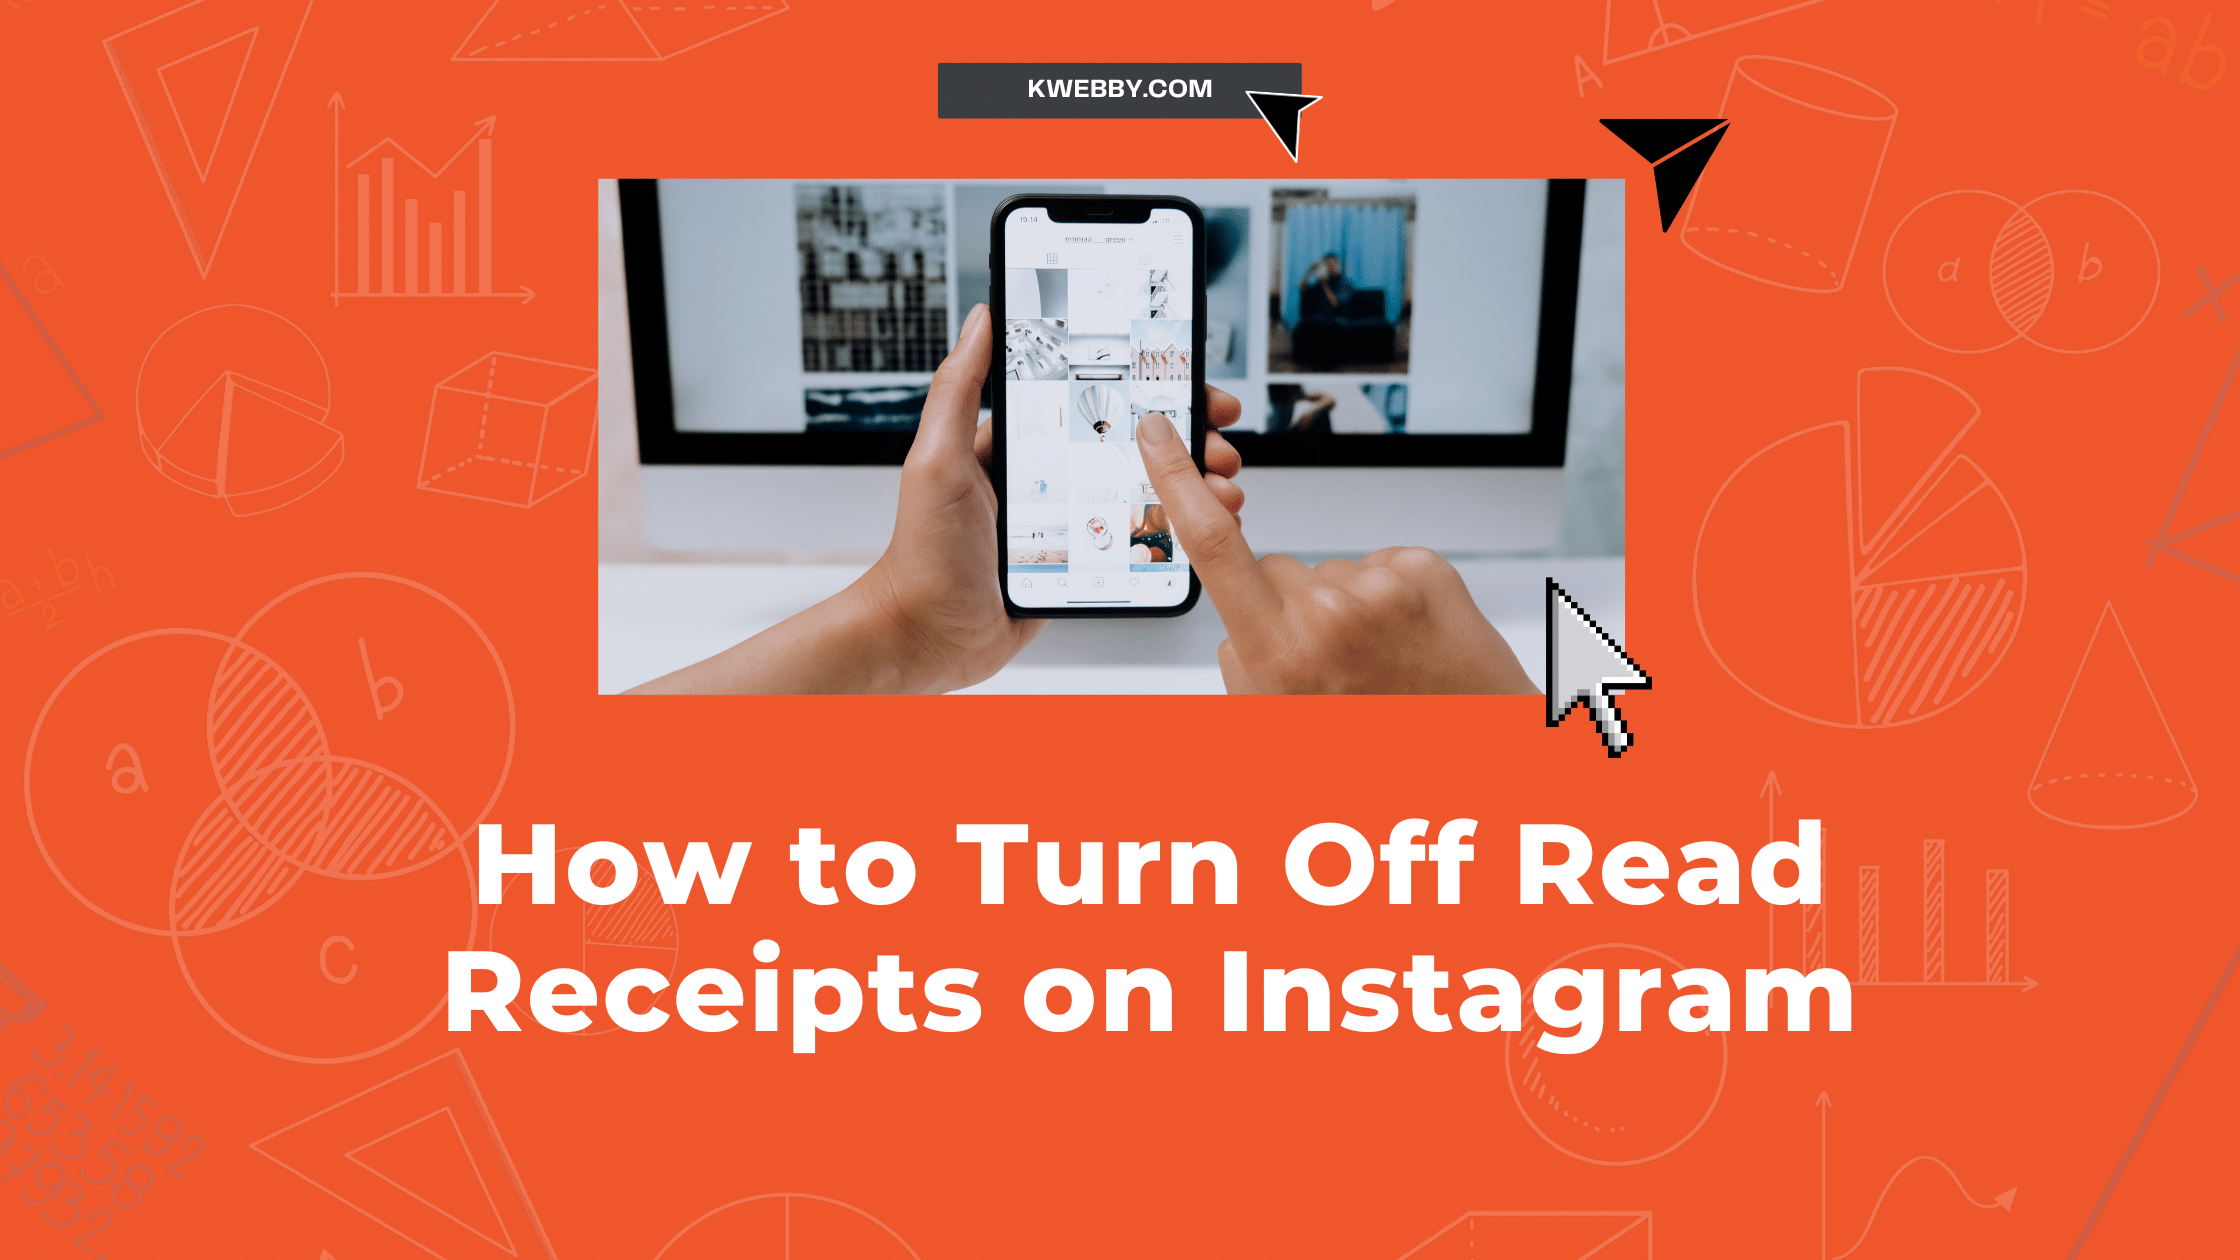 How to Turn Off Read Receipts on Instagram (5 Methods)